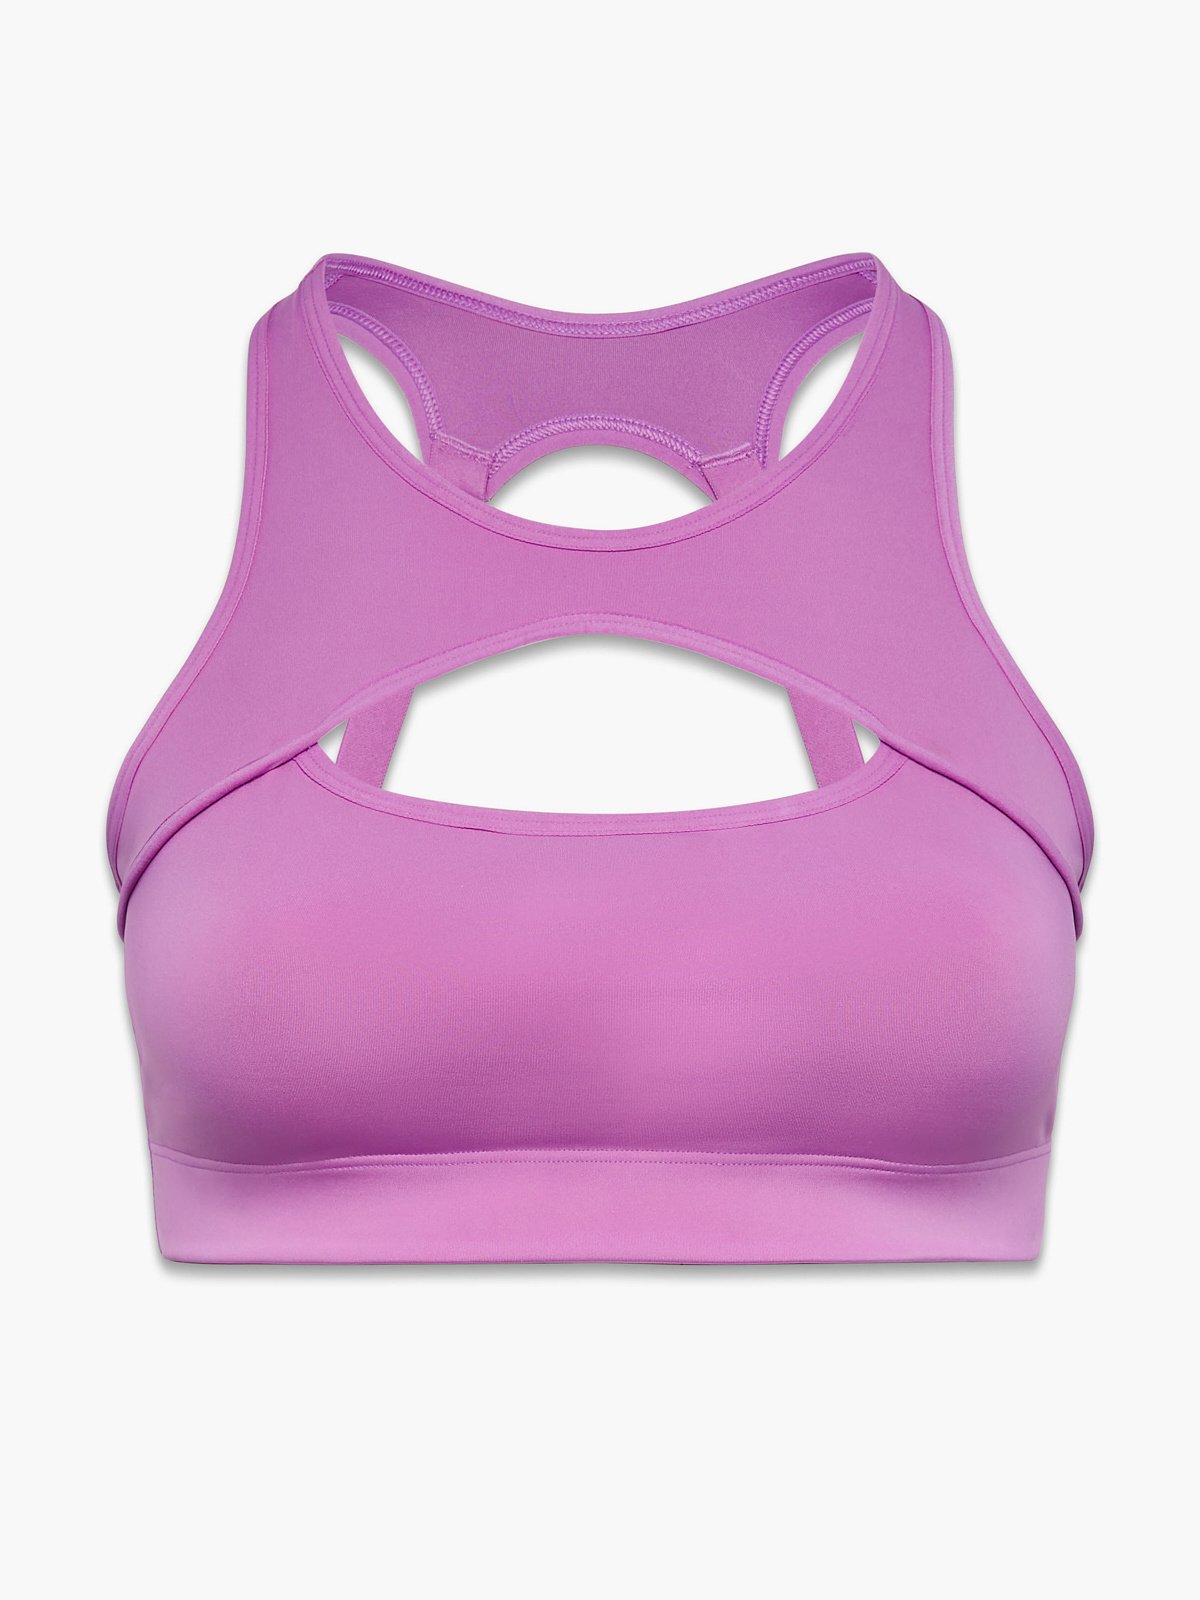  High Impact Sports Bras For Women Support Underwire Cross  Back Large Bust Cool Comfort Molded Cup Purple Eggplant 38D